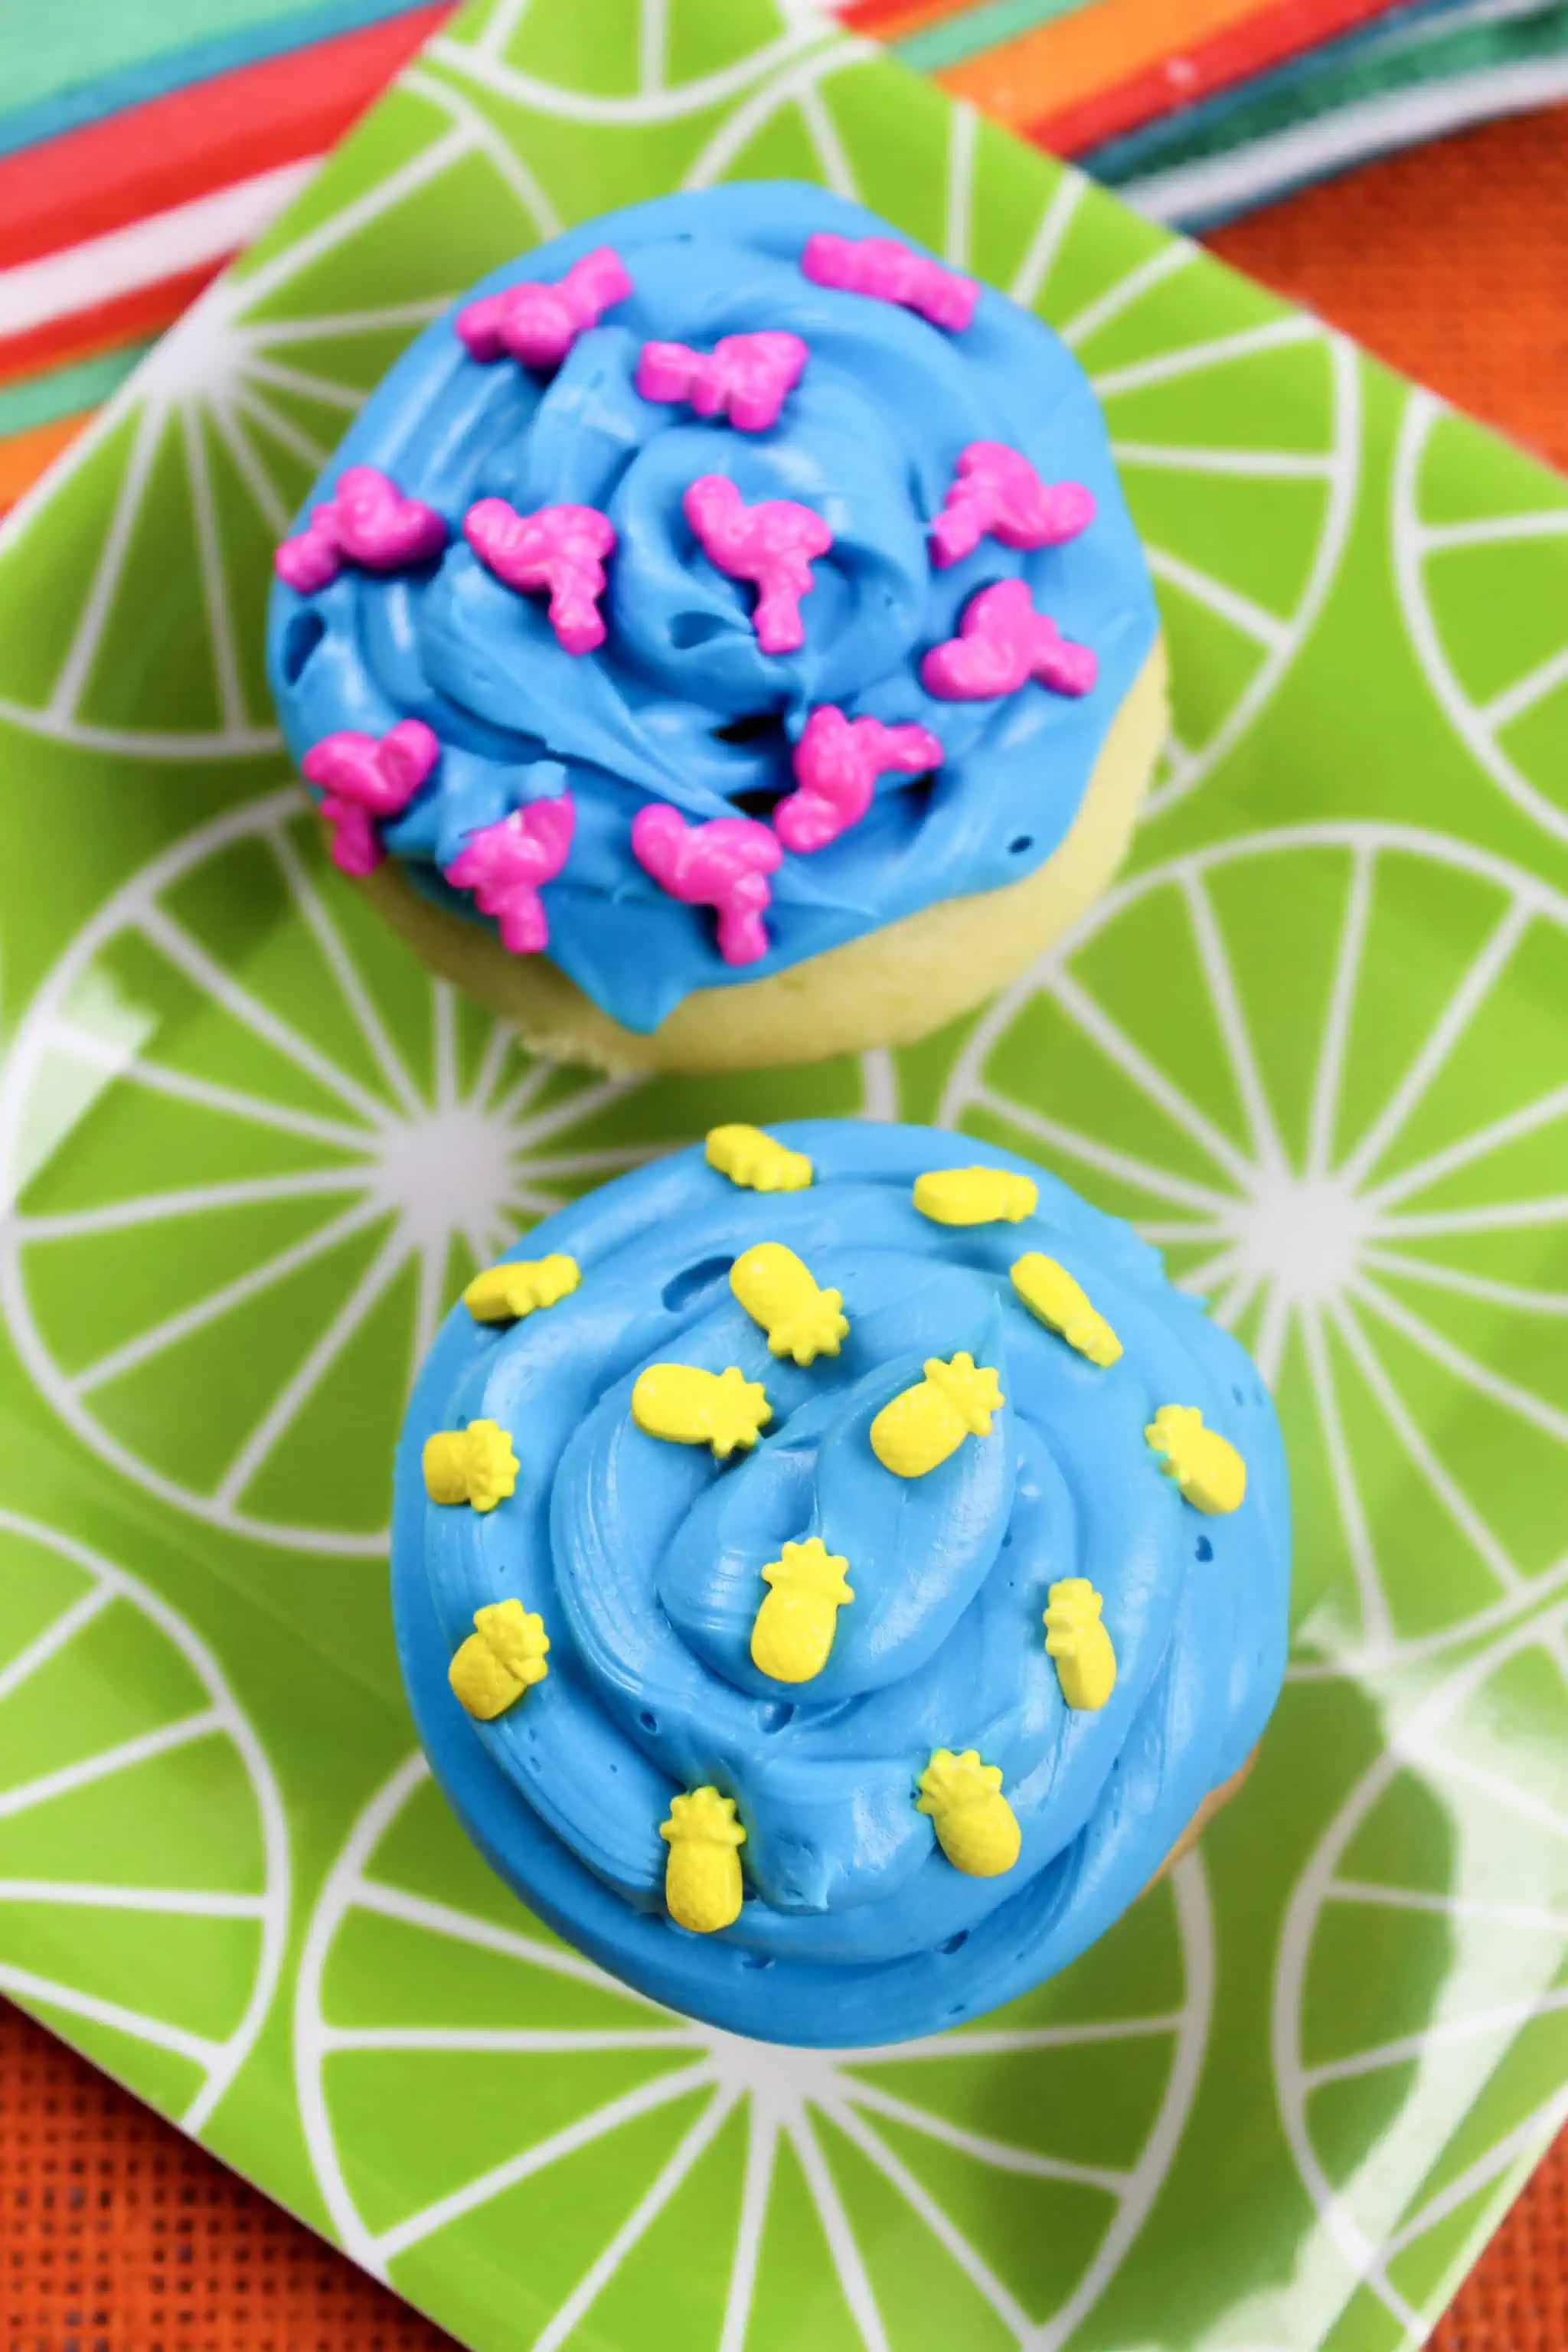 Summer cupcakes a fun addition to dessert. These summer cupcake ideas are delicious and simple. Change up the flavor to fit an summer cupcake flavor ideas 12